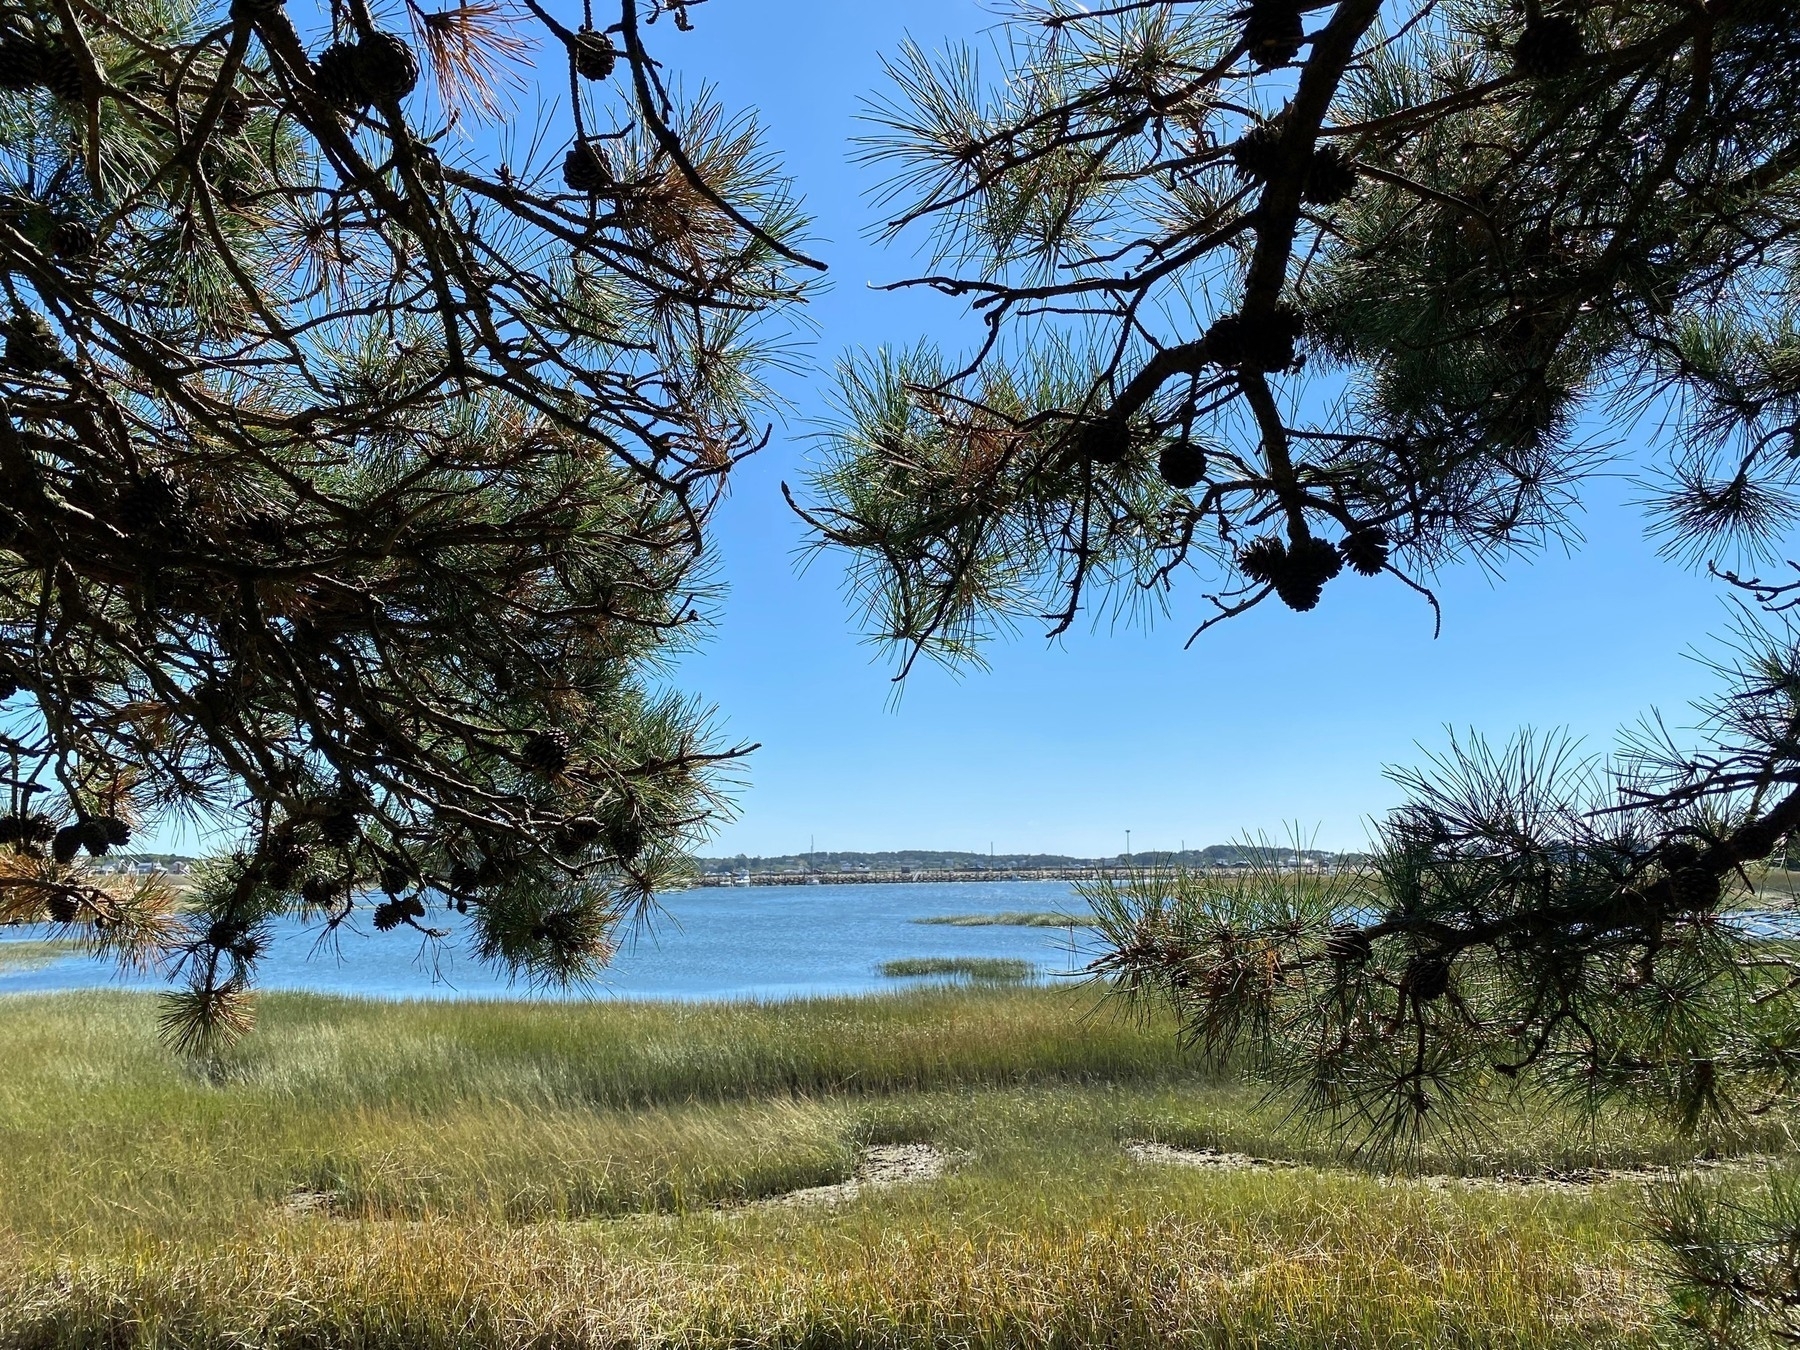 Afternoon view of Wellfleet Harbor framed by salt marsh below and pine branches above.